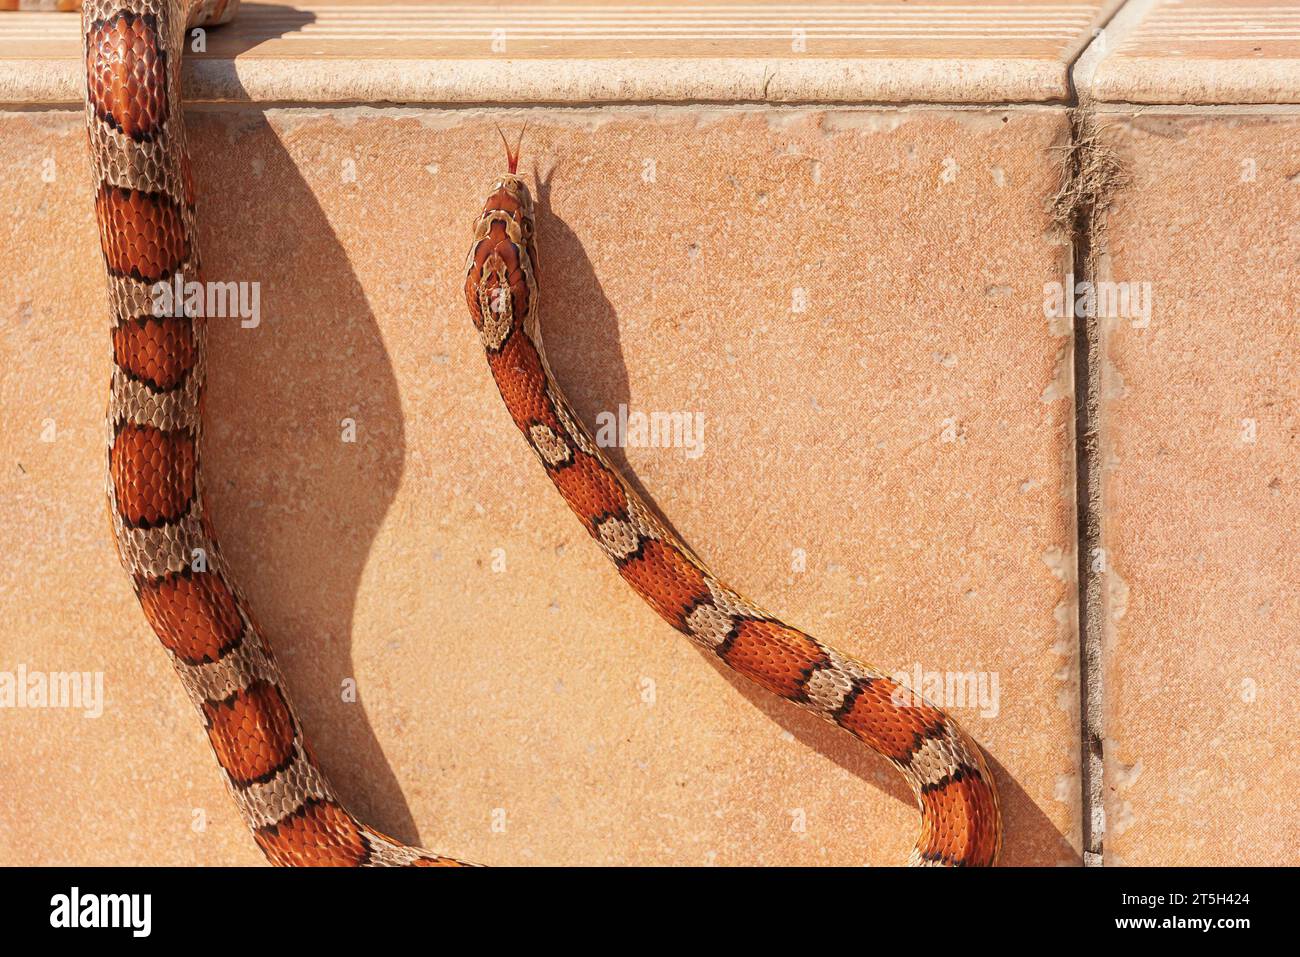 Red snake - Pantherophis guttatus crawls on the pavement and has its tongue out Stock Photo